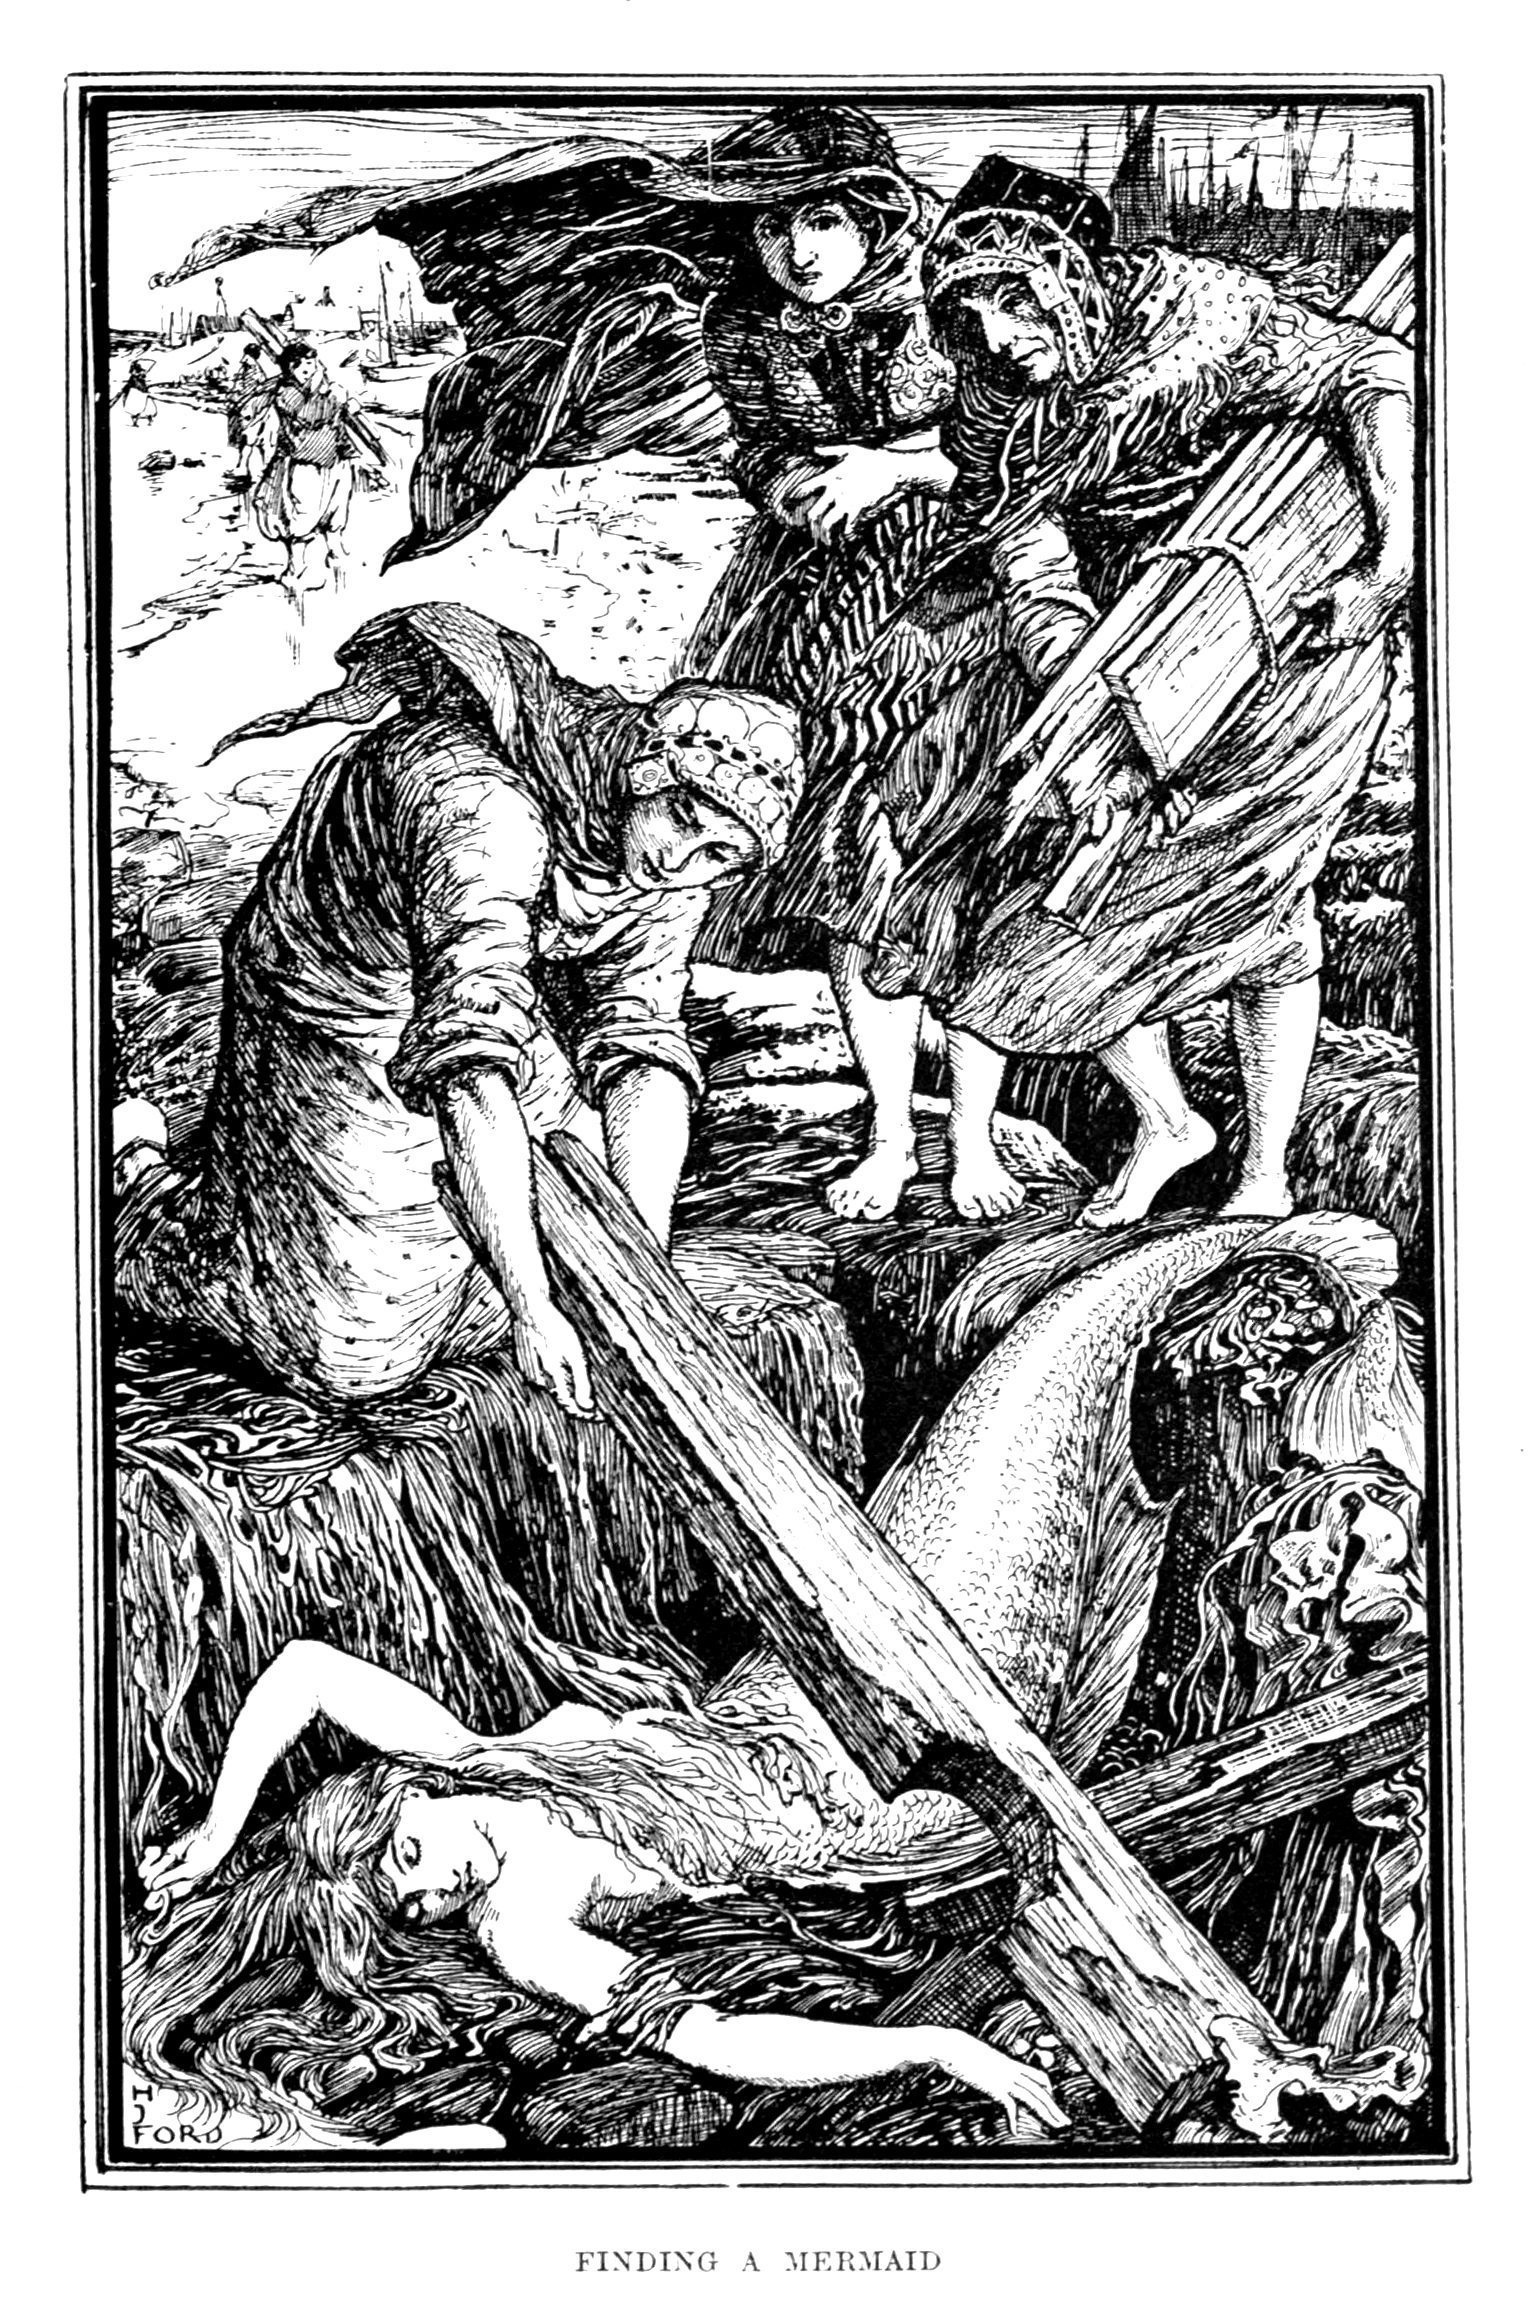 Henry Justice Ford - The red book of animal stories selected and edited by Andrew Lang, 1899 (illustration 3)